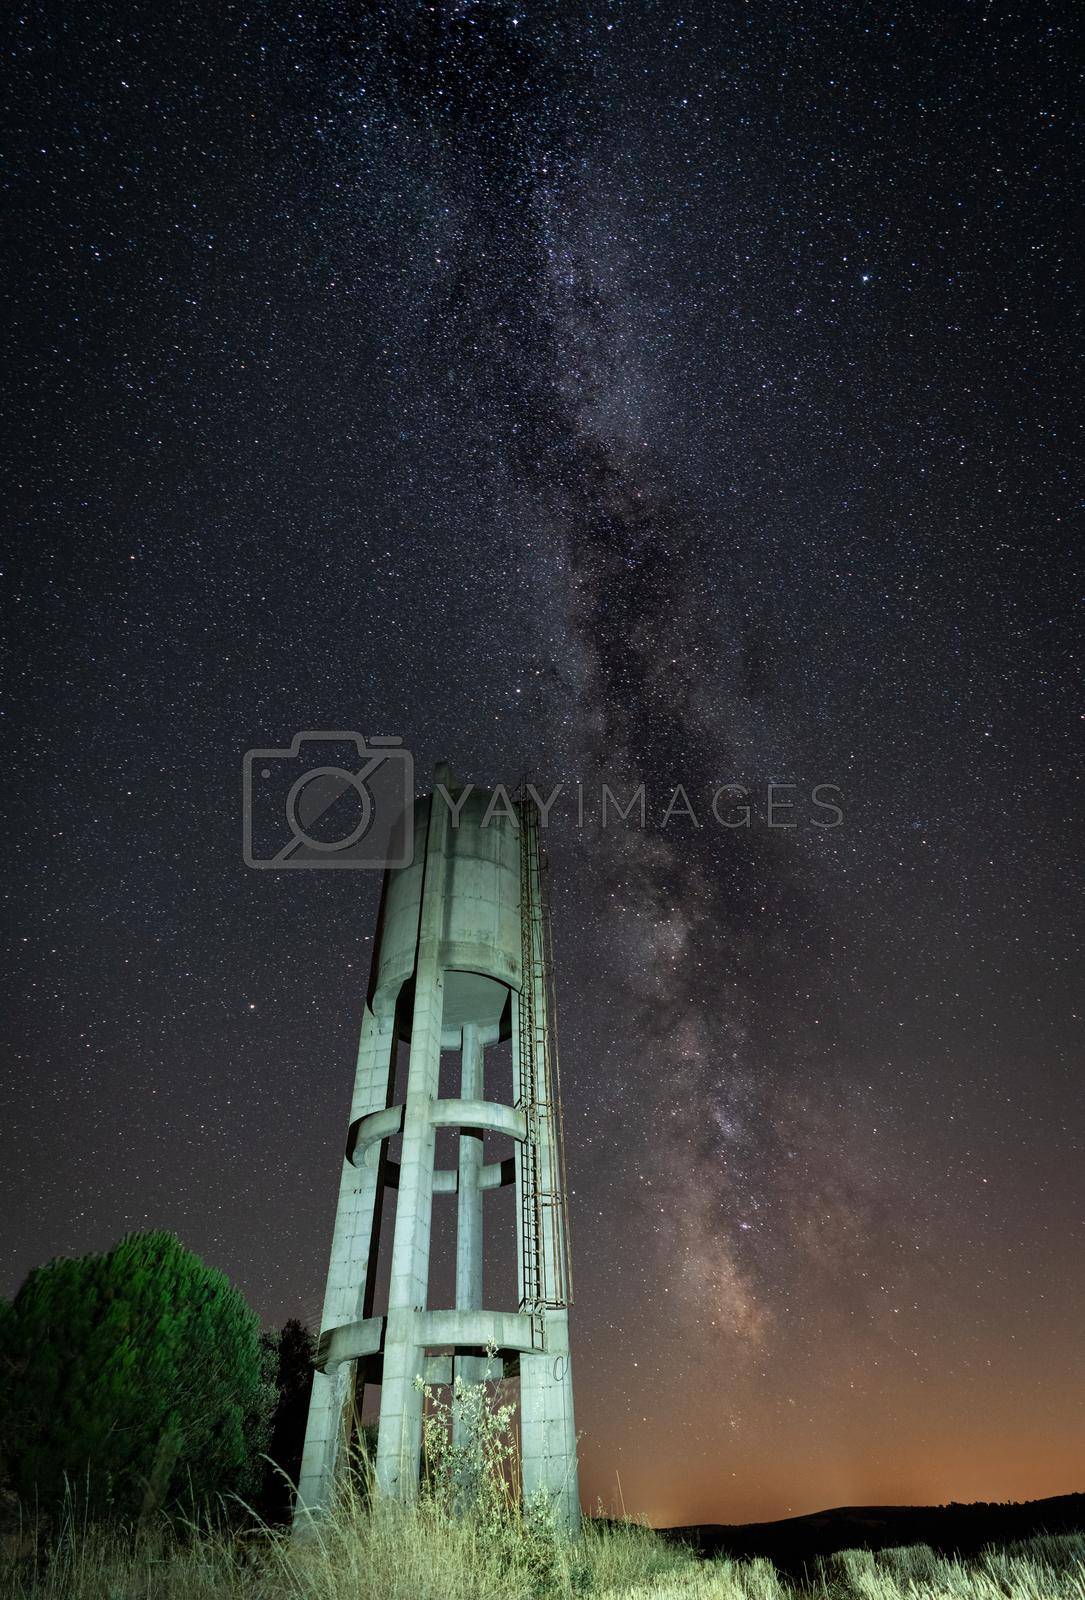 Royalty free image of Rusty concrete water Tank under the stars by FerradalFCG